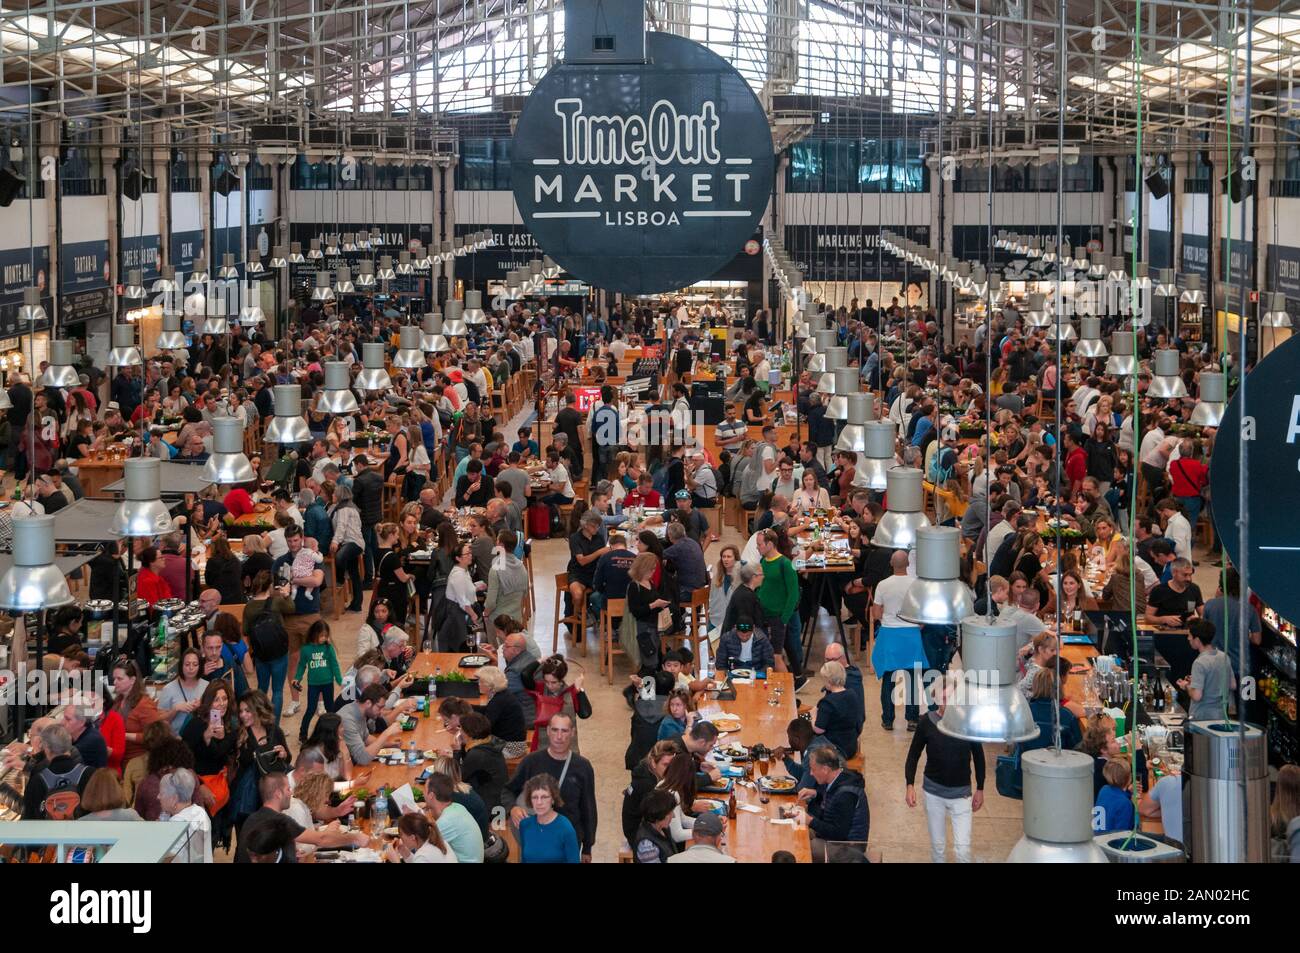 Time Out Market Lisboa is a food hall located in the Mercado da Ribeira,  Lisbon, Portugal Stock Photo - Alamy